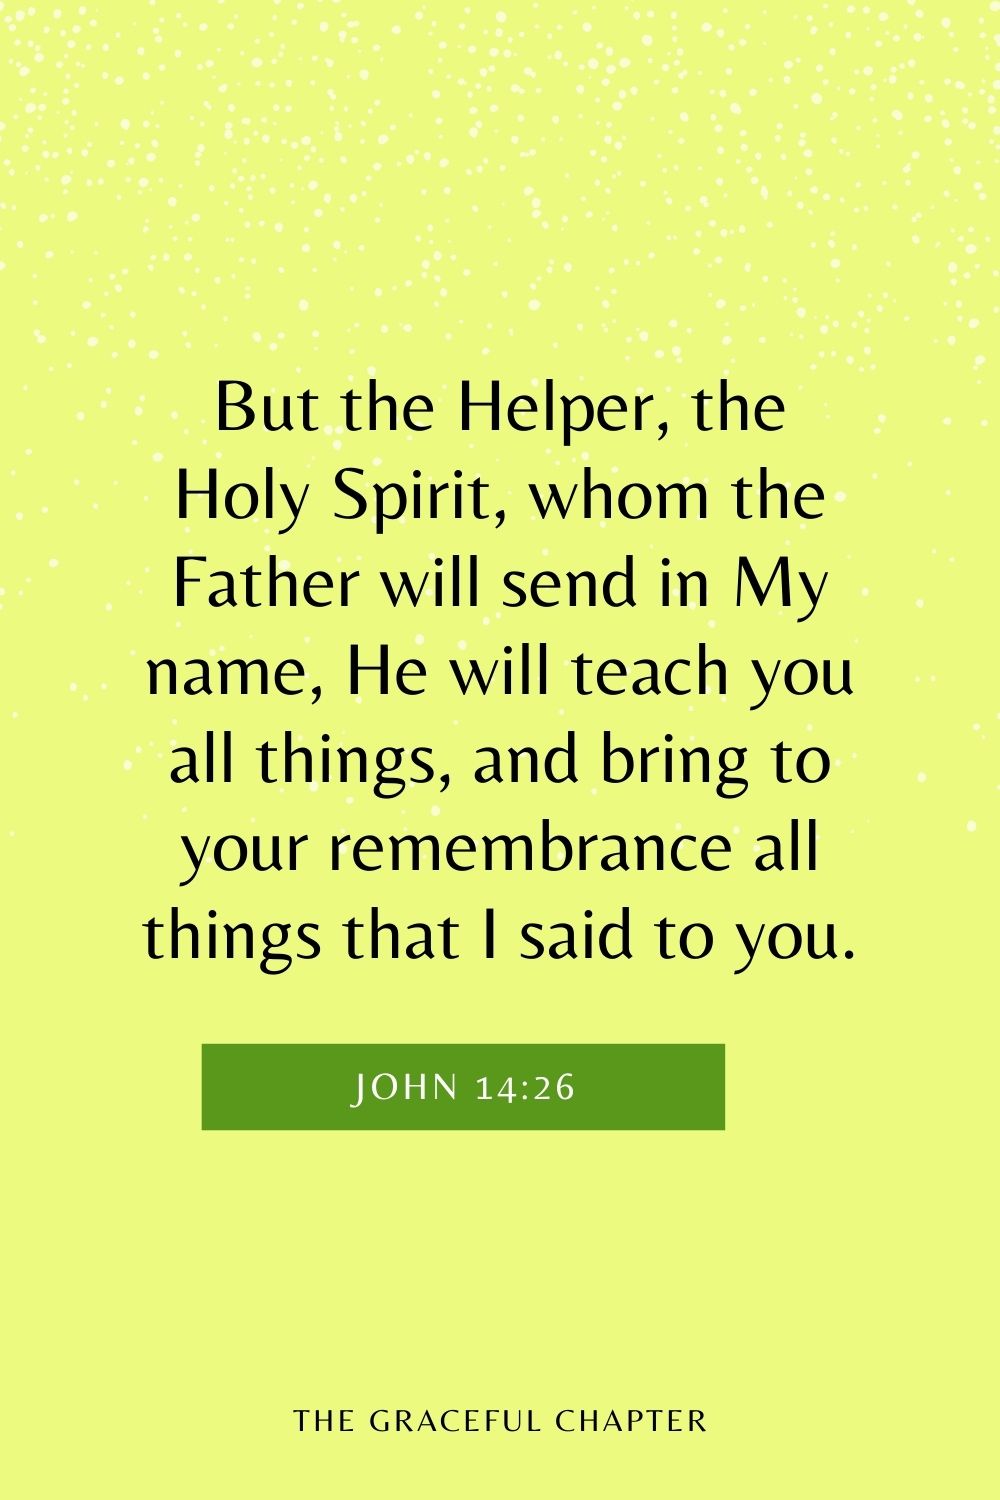 But the Helper, the Holy Spirit, whom the Father will send in My name, He will teach you all things, and bring to your remembrance all things that I said to you. John 14:26